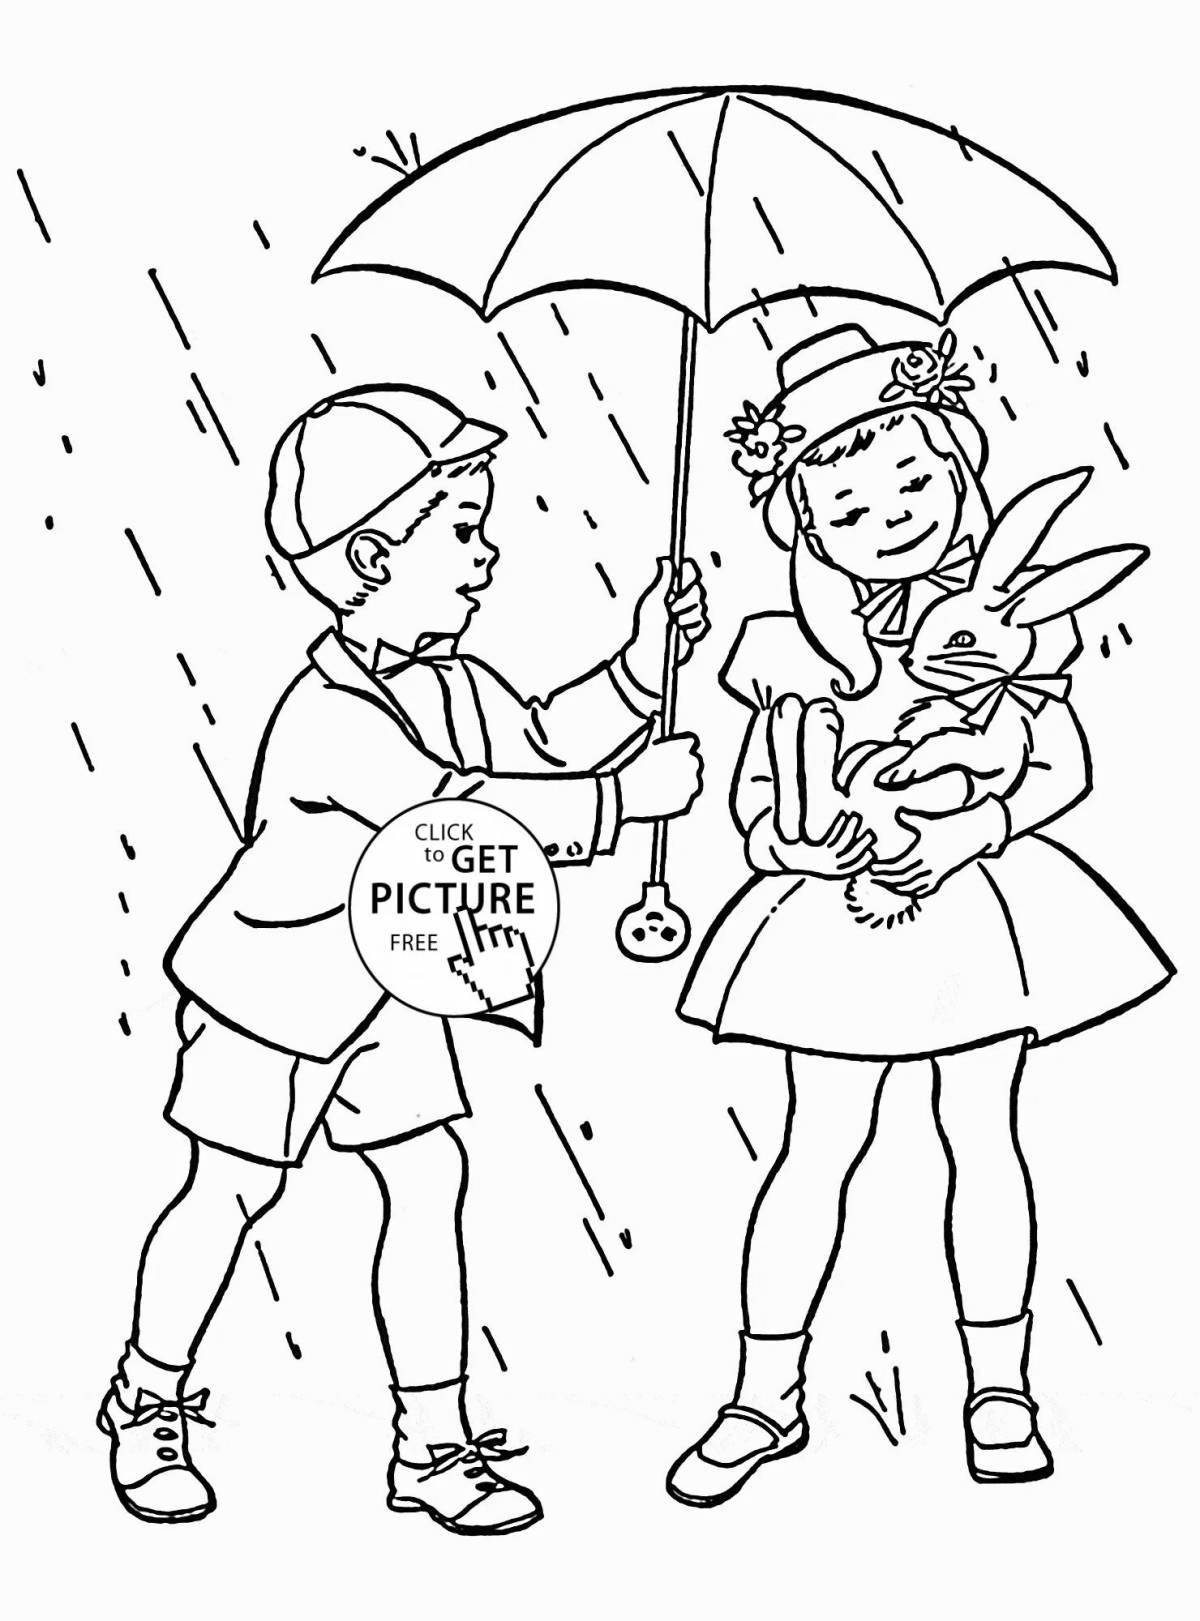 Coloring page cheerful spring rain